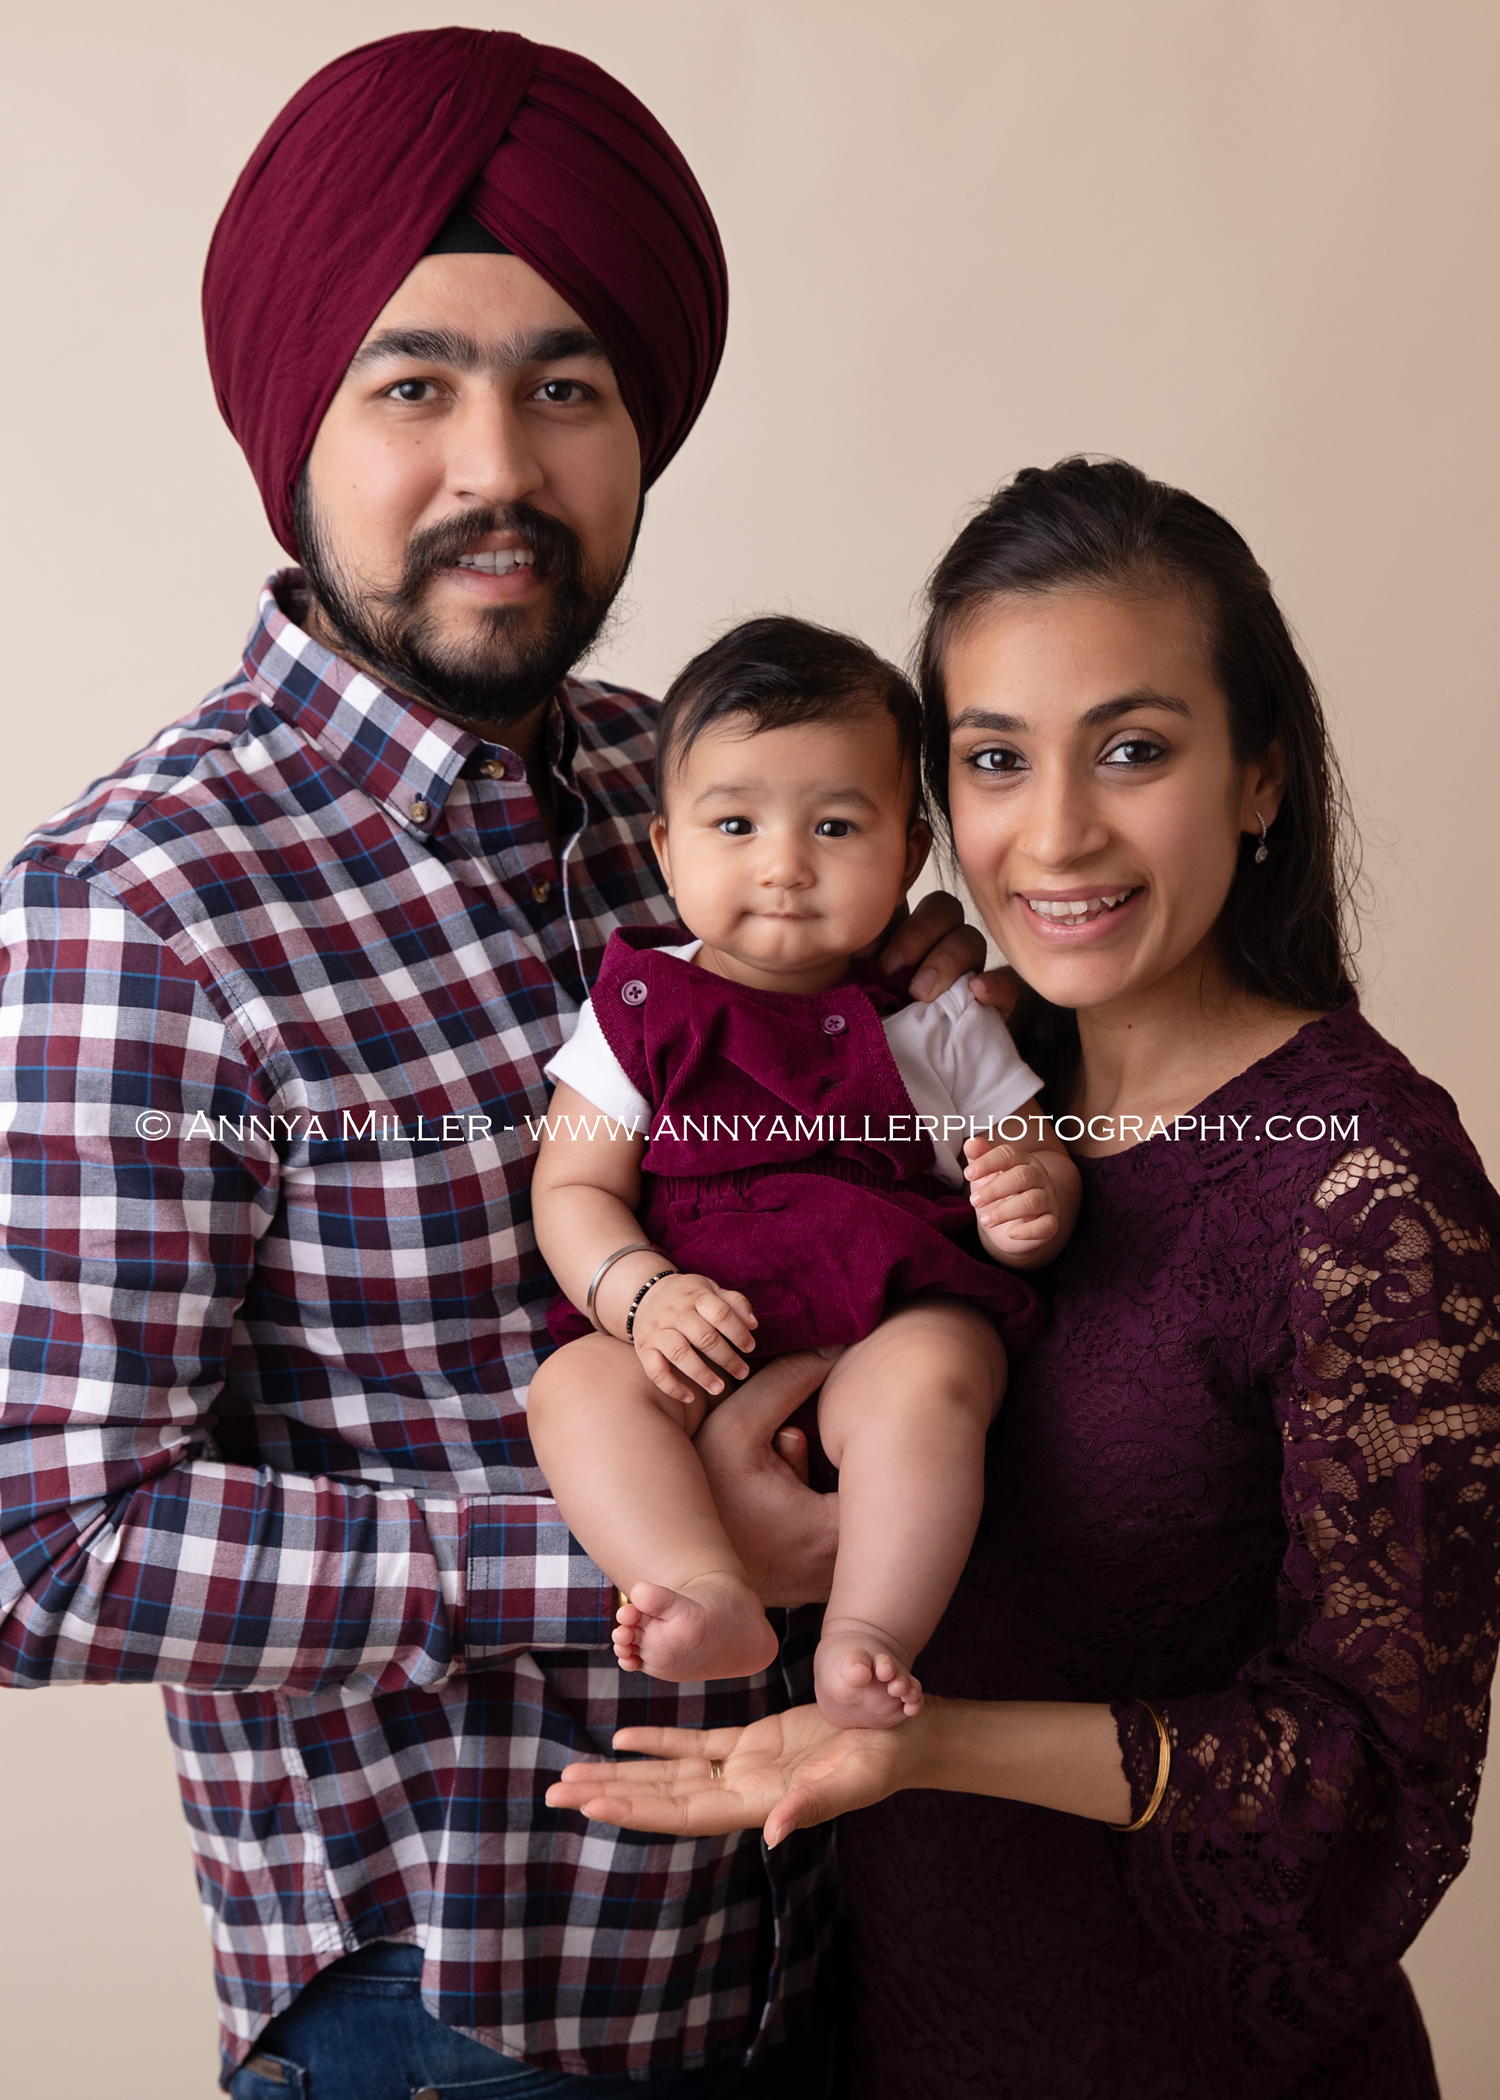 Portraits of baby girl and family by Pickering family photographer Annya Miller